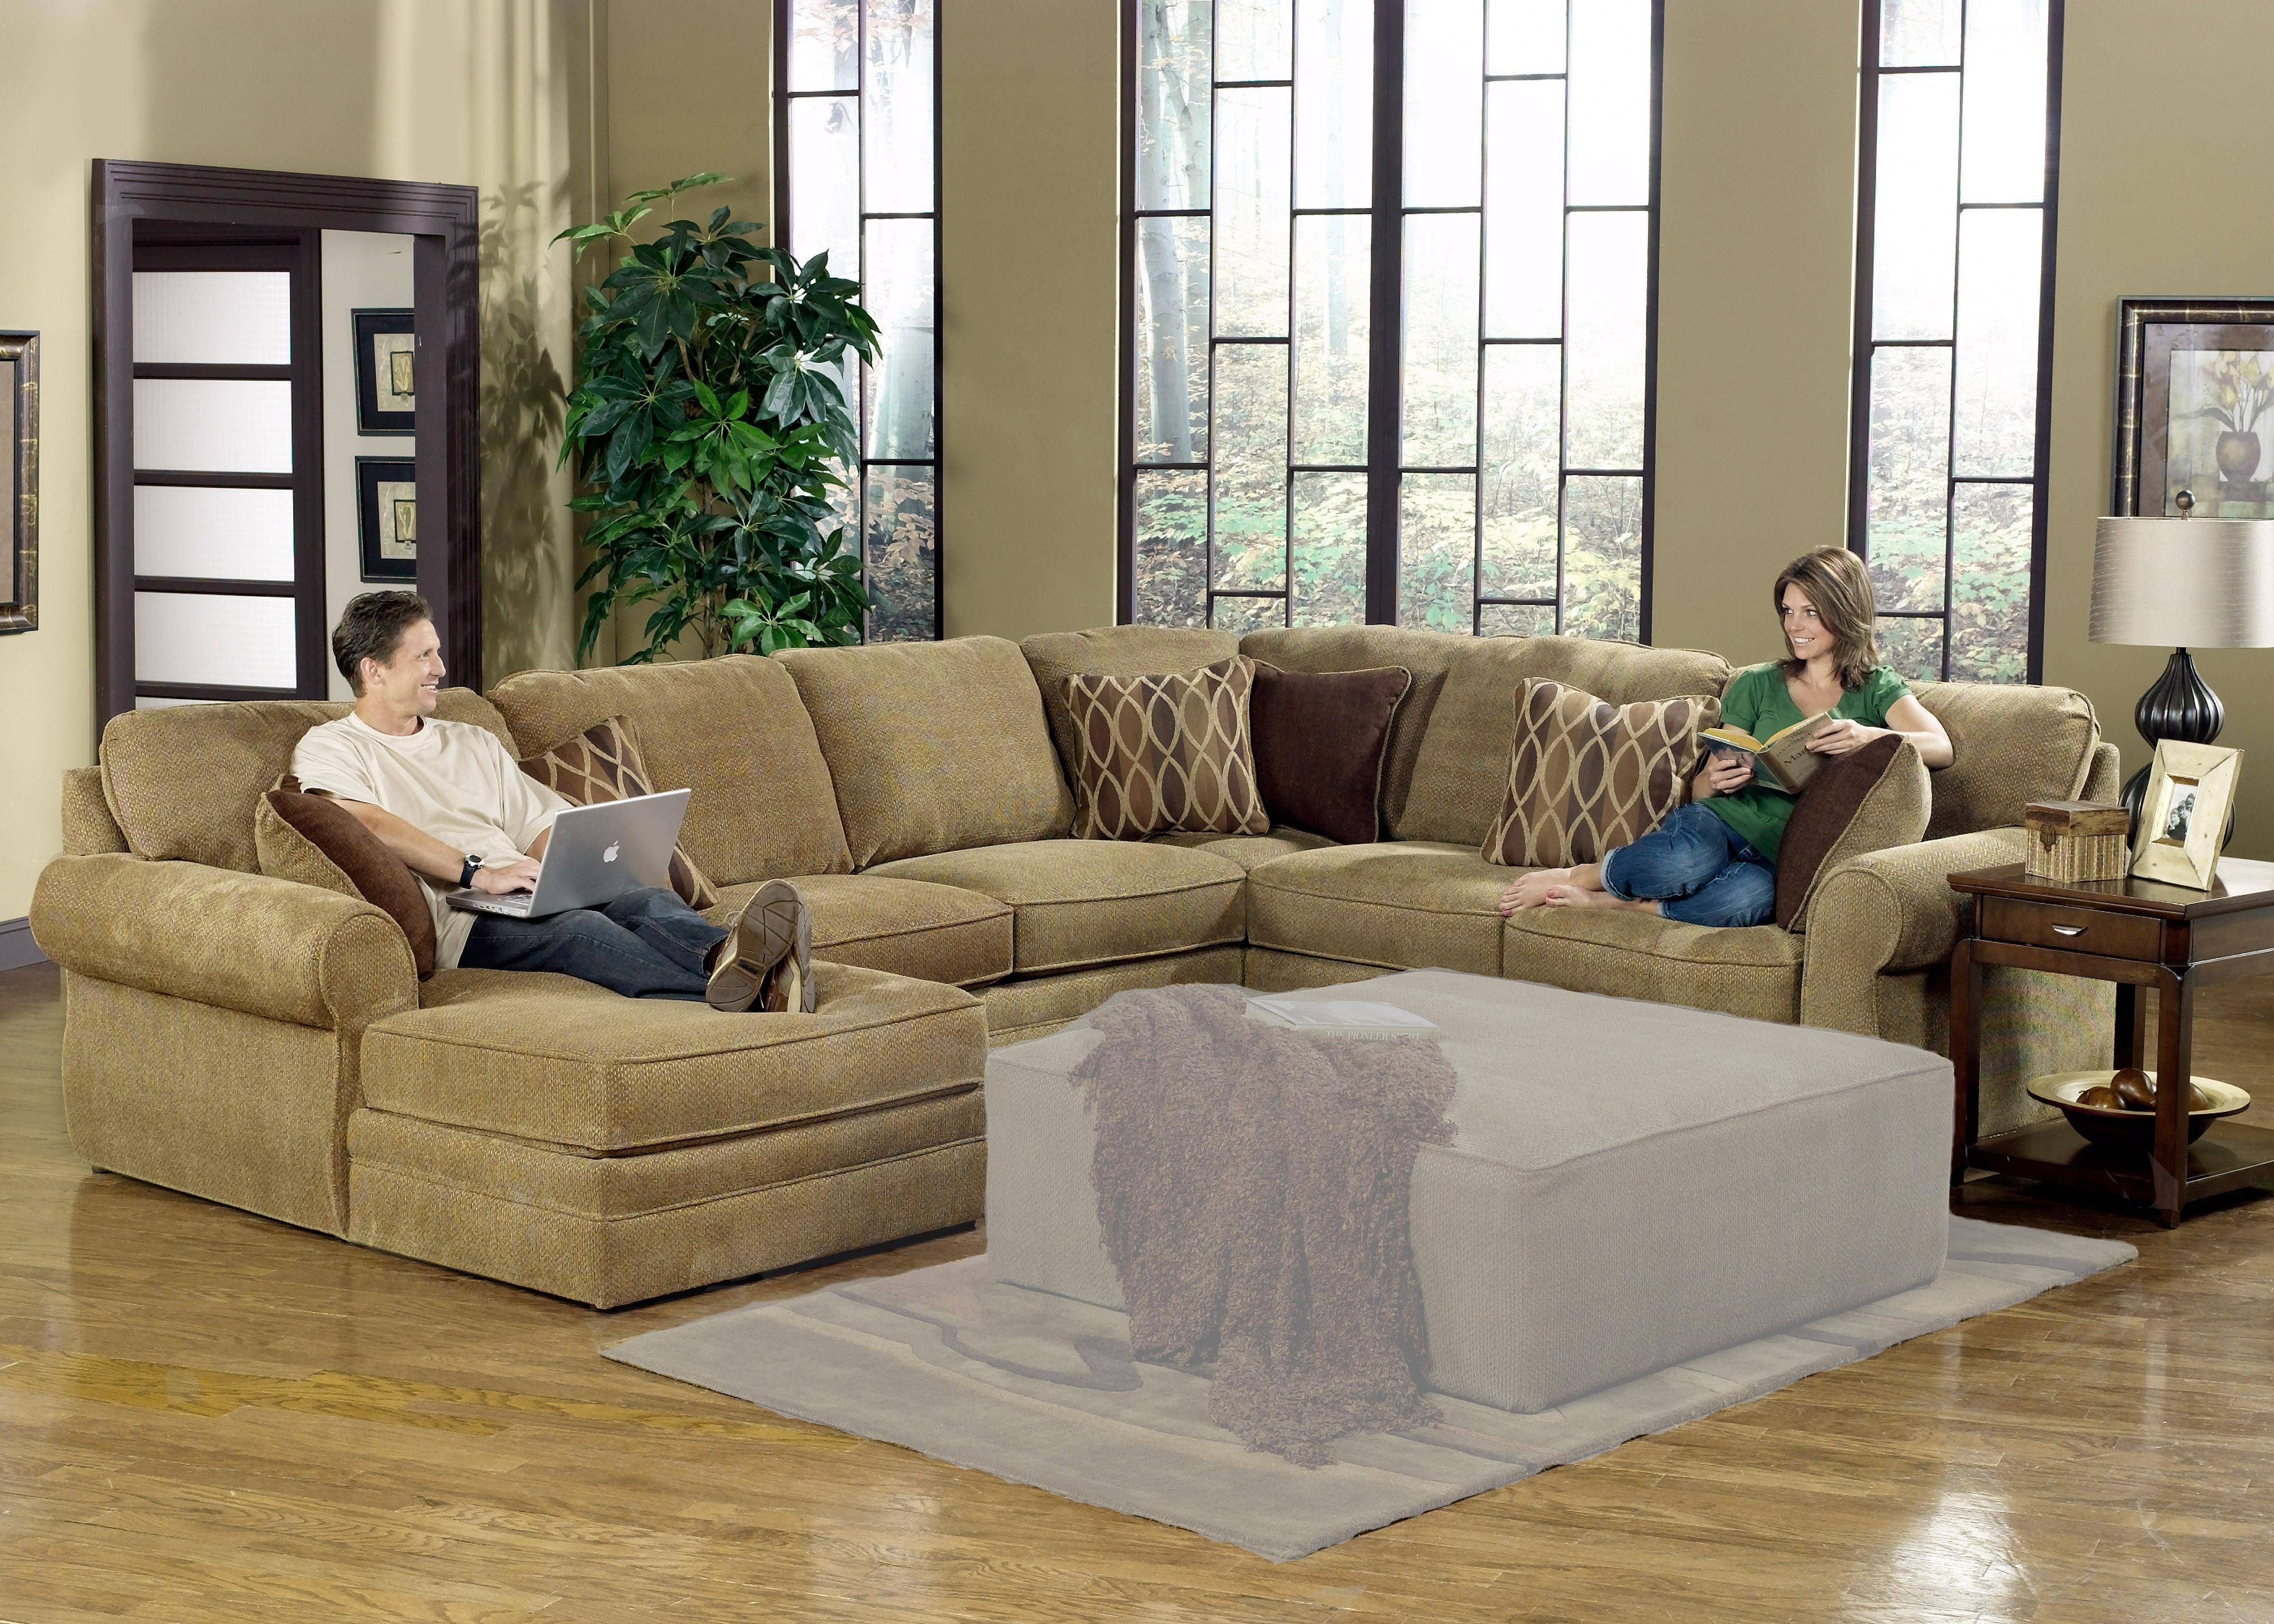 Sofas Center : Alluring Extra Large Sectionalfas And Modern Table Throughout Extra Large Sectional Sofas (View 9 of 30)